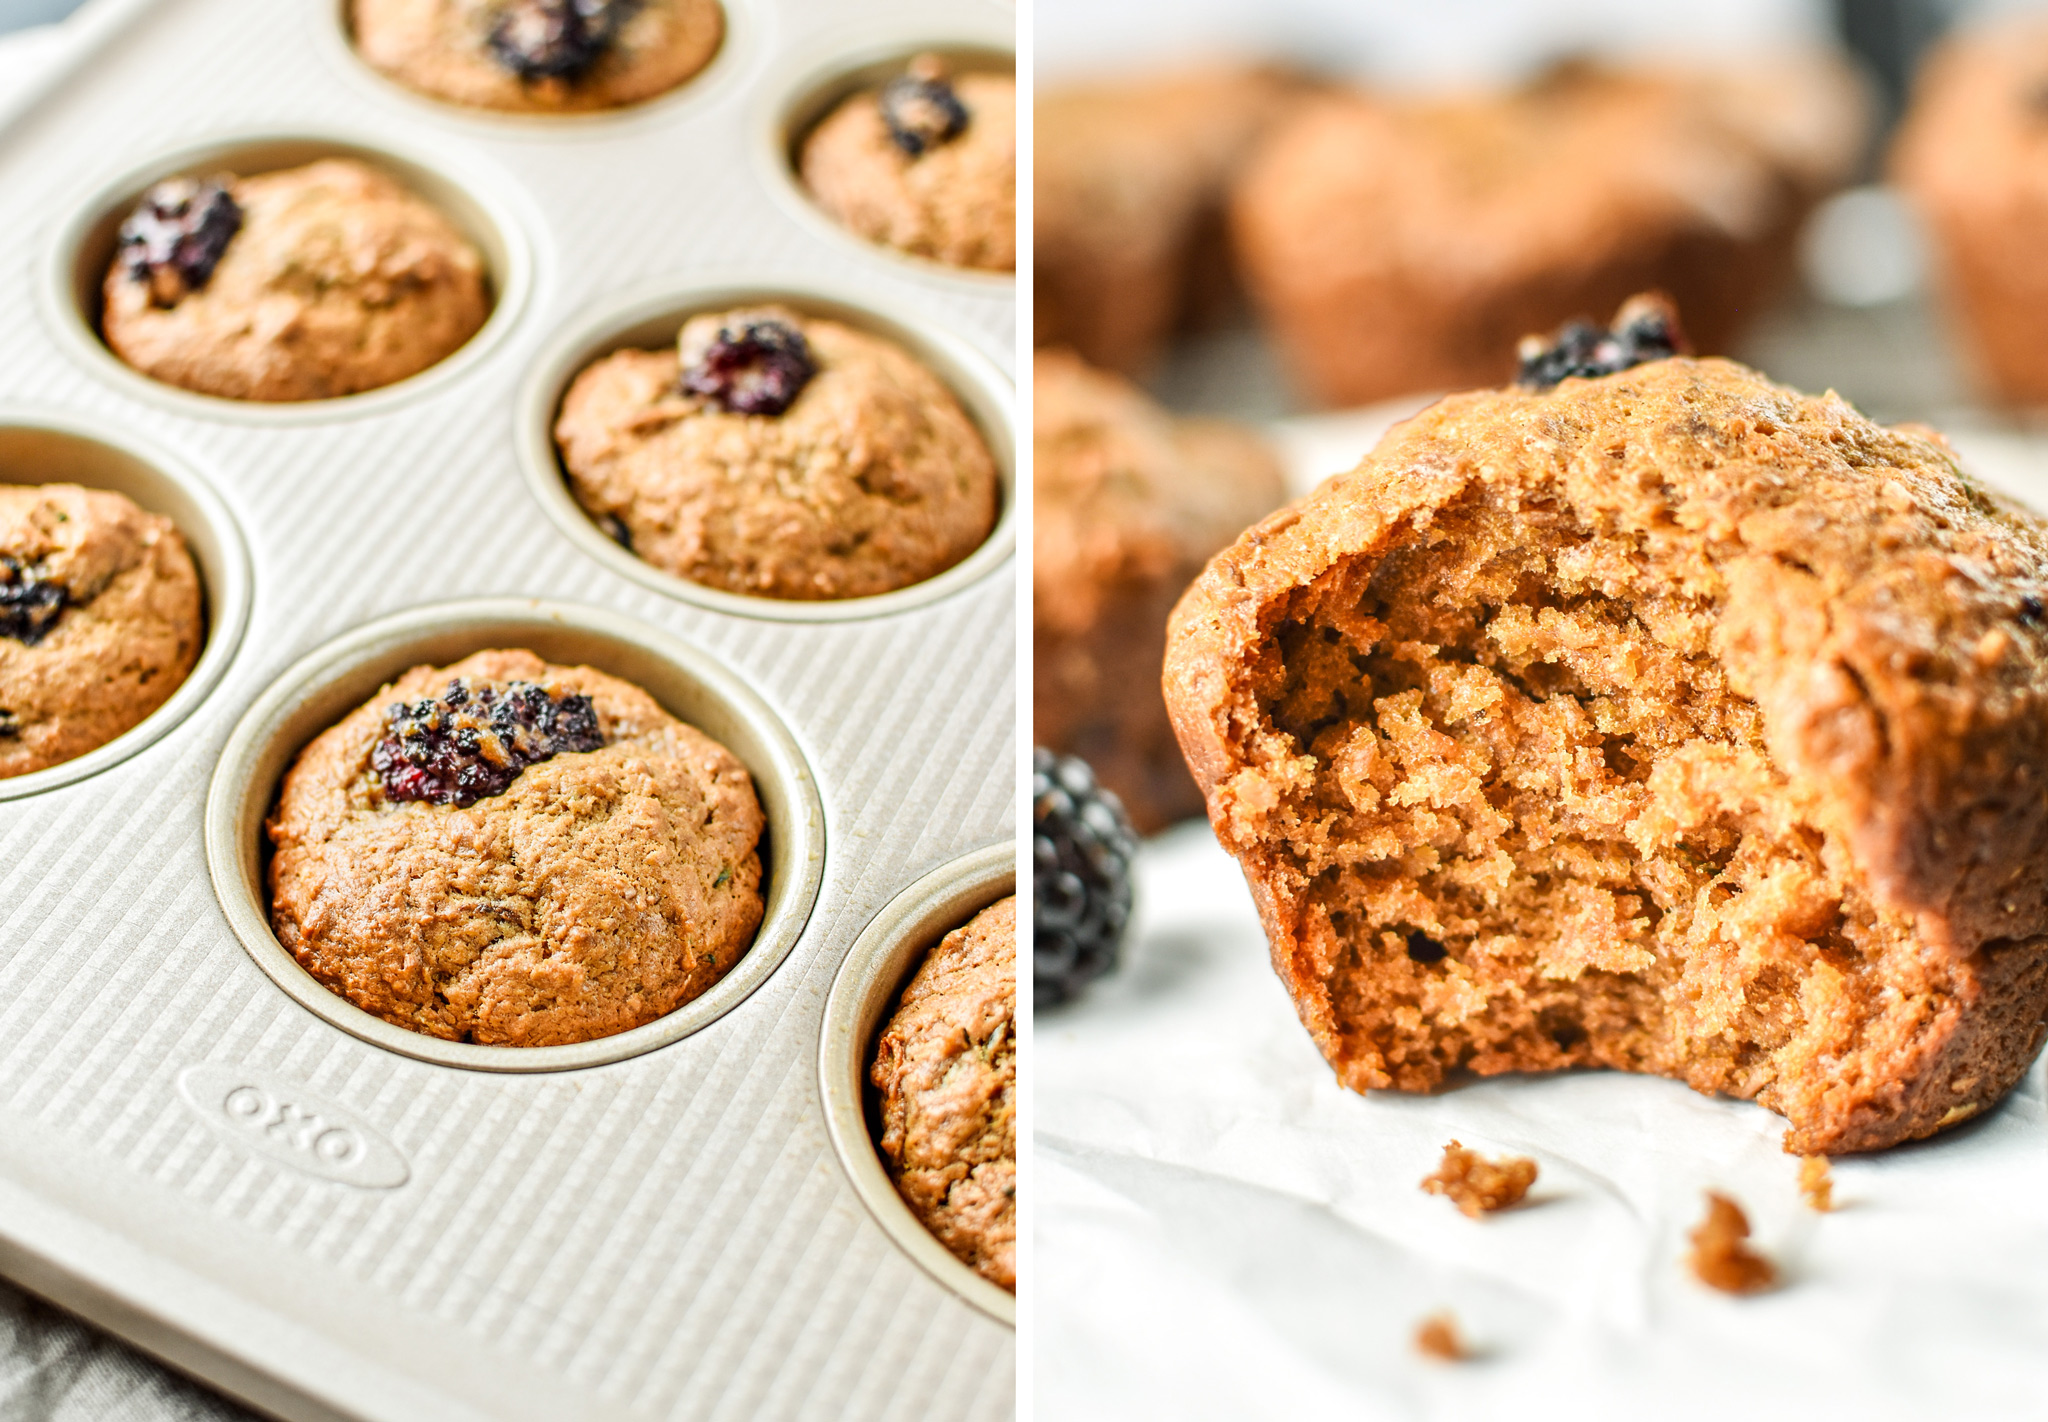 A fresh batch of Blackberry Bran Muffins made in the OXO muffin tin.